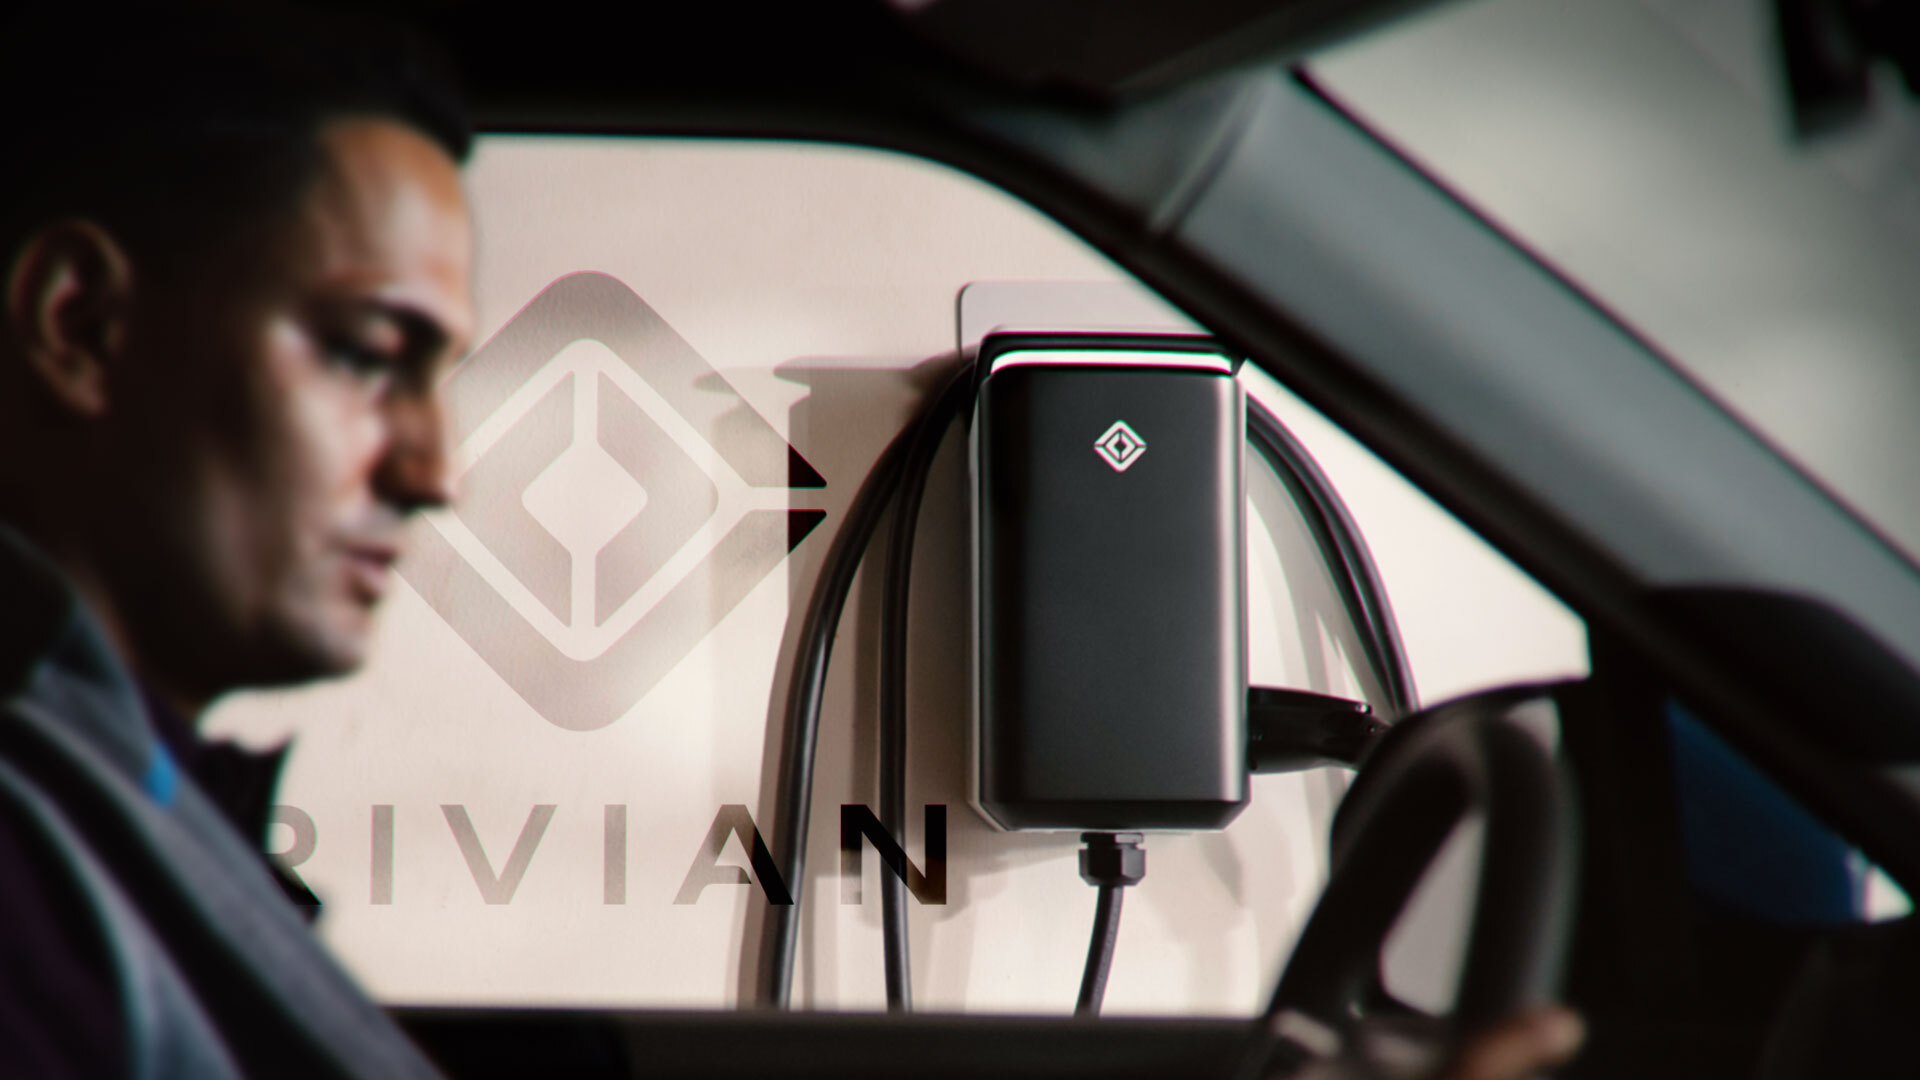 An image of Luke sitting in a car looking forward, Rivian on the wall behind him; Rivian stock